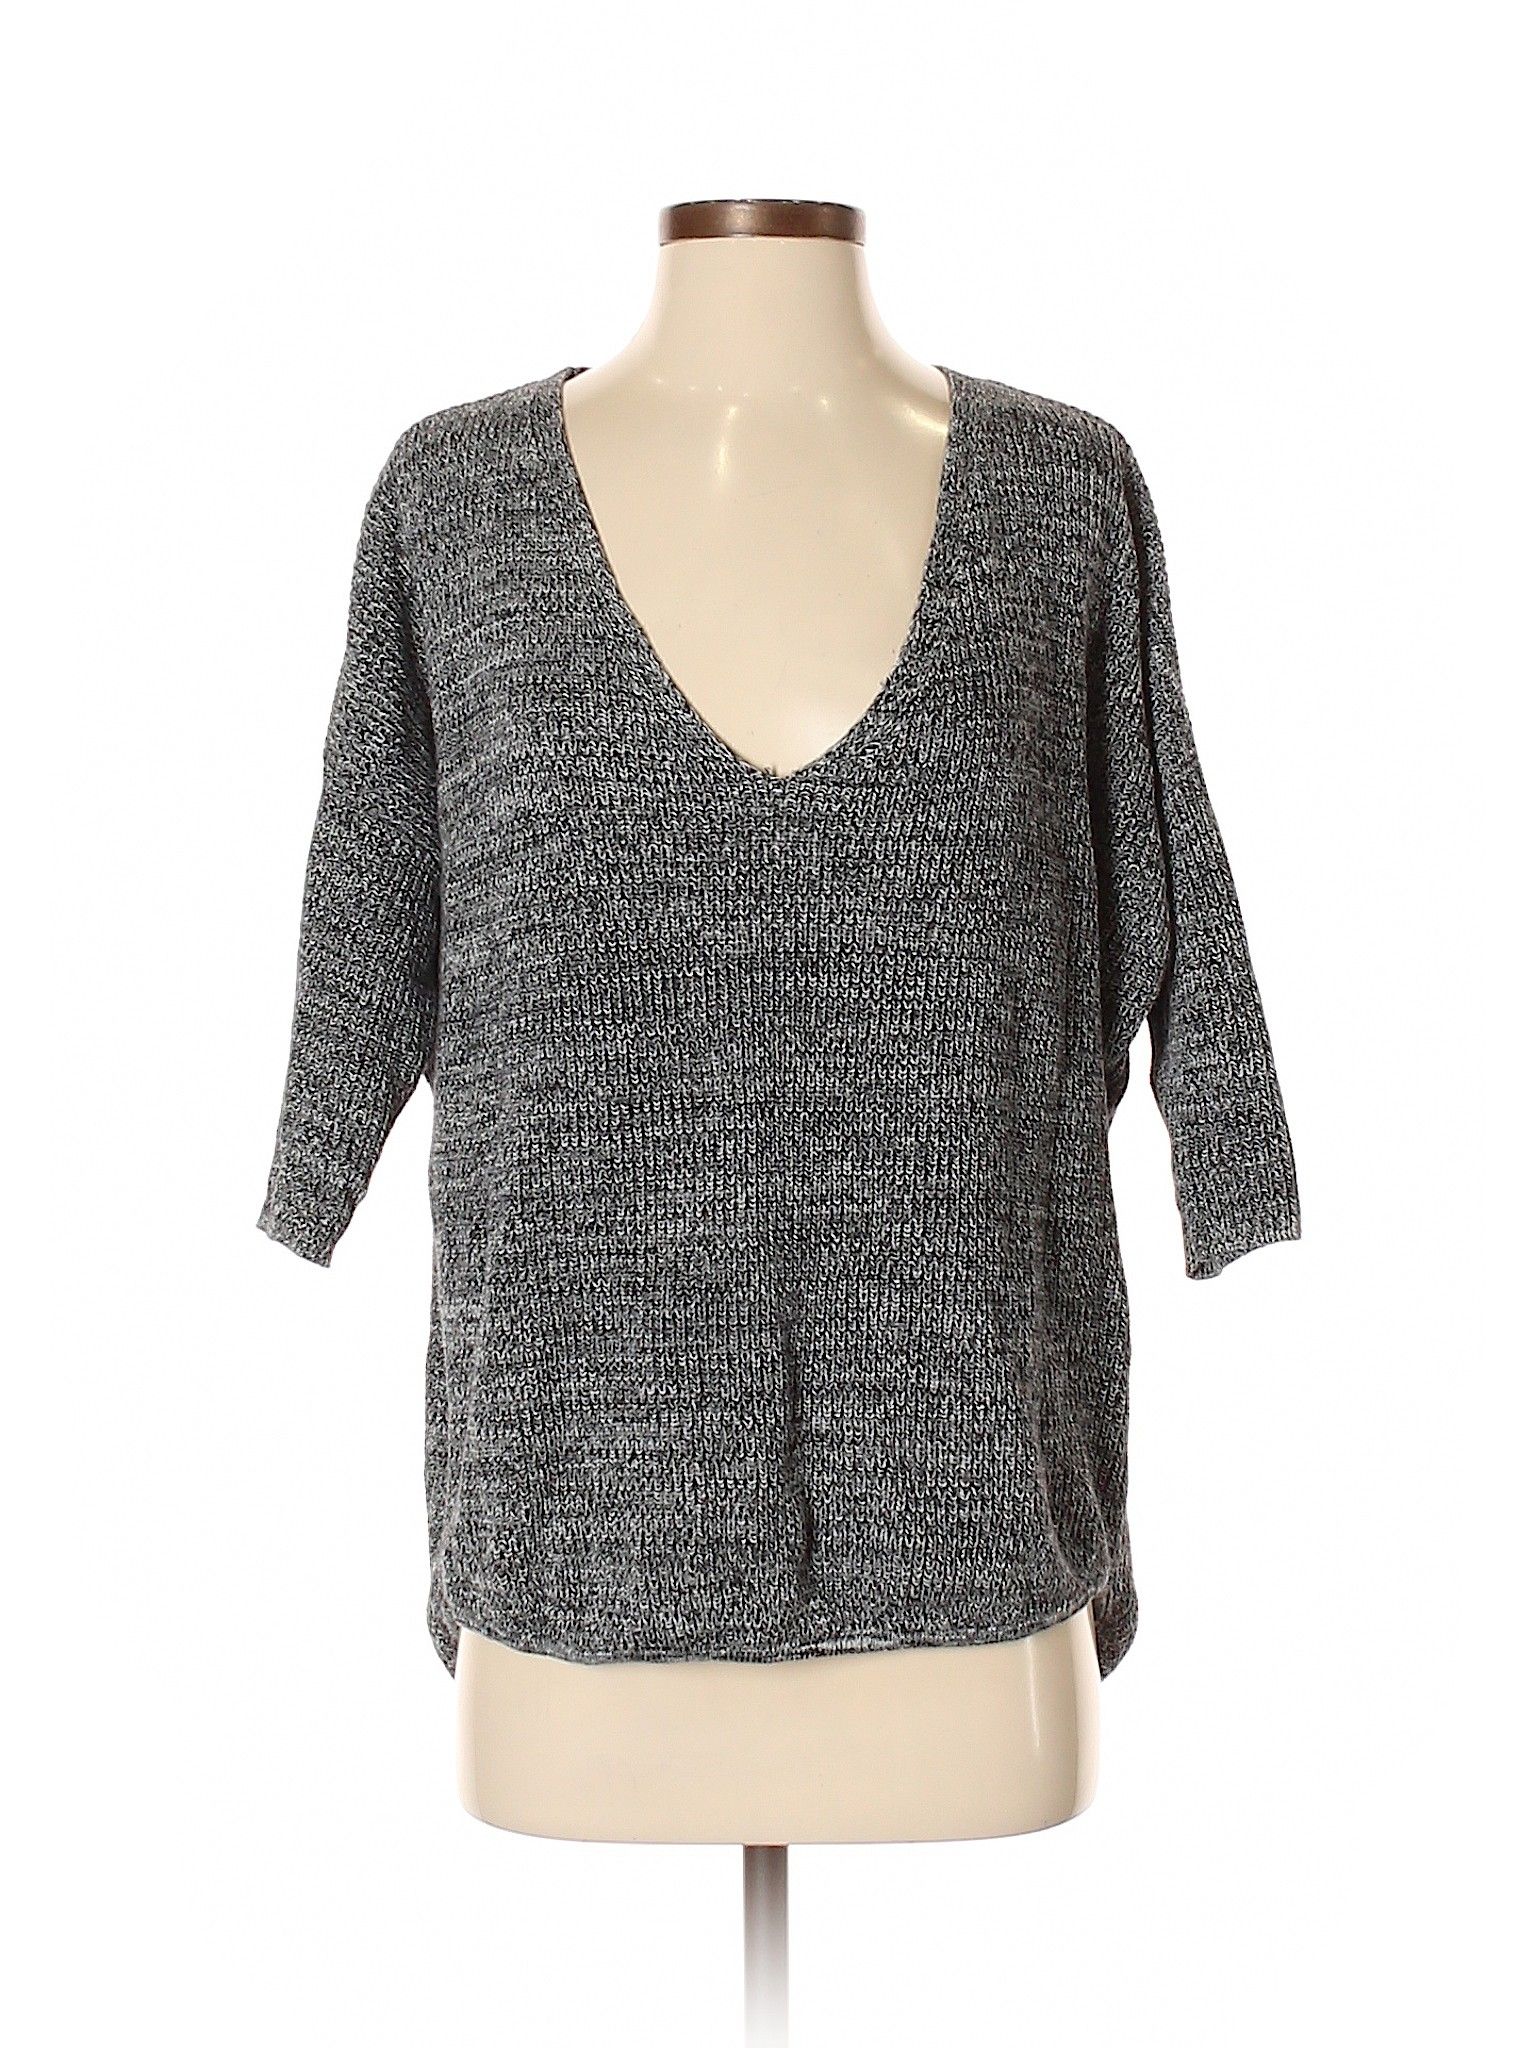 Express Pullover Sweater Size 4: Gray Women's Tops - 43662867 | thredUP